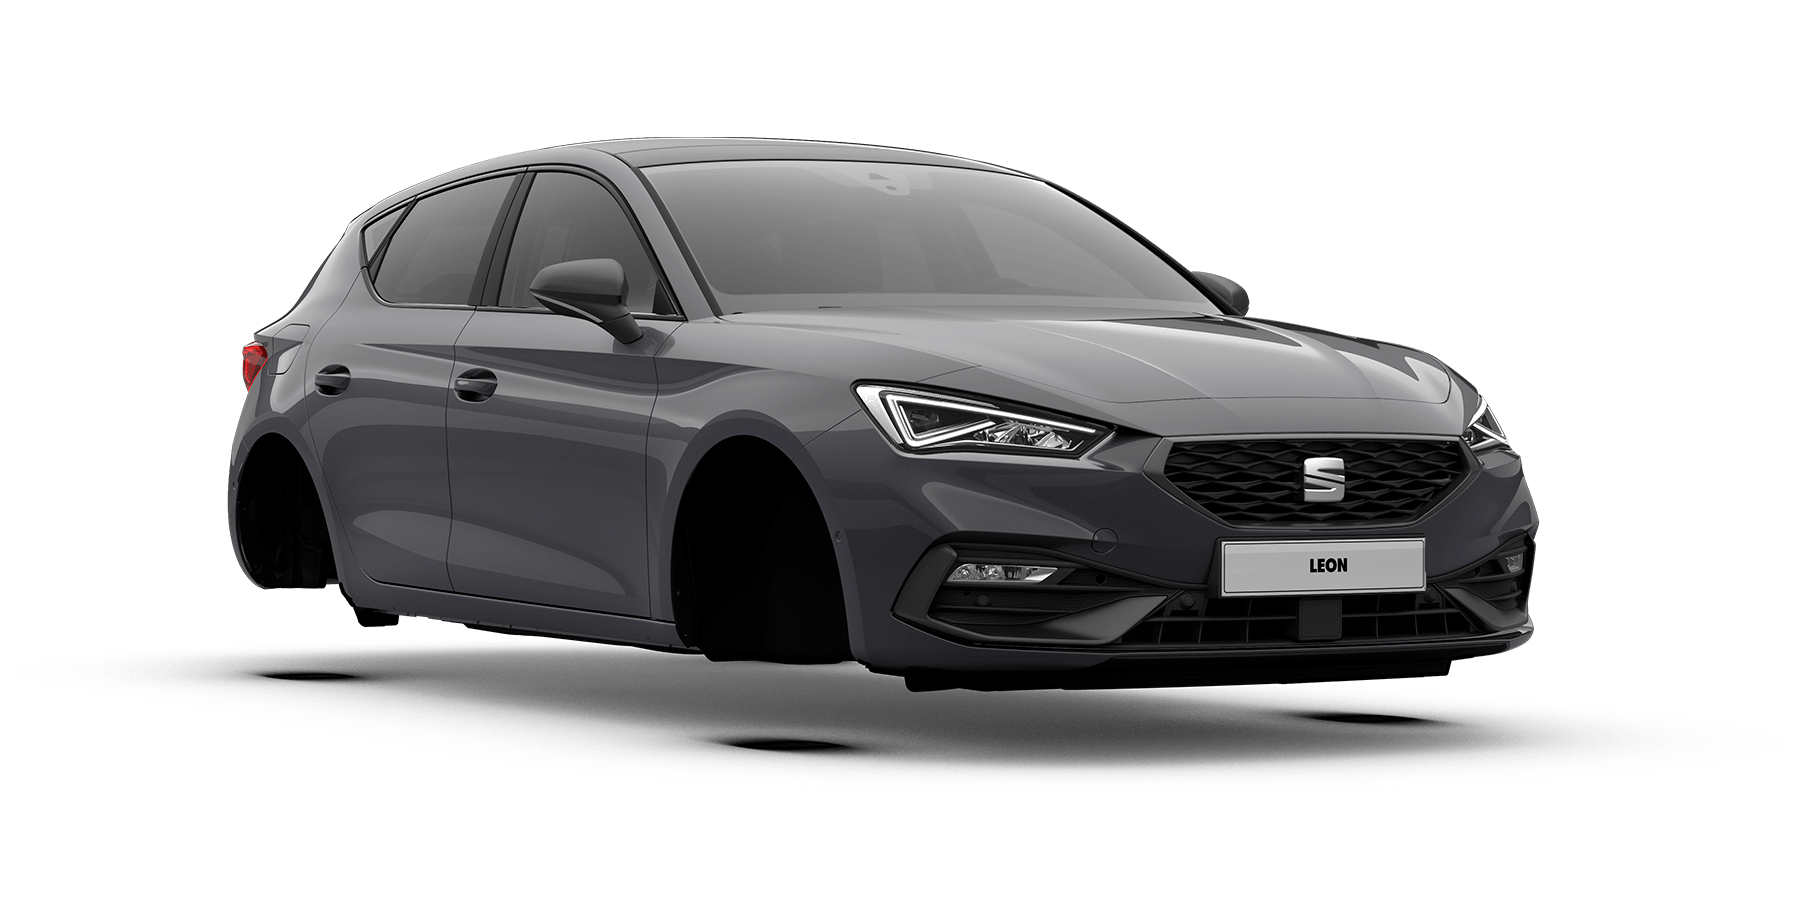 https://www.seat.es/content/dam/public/seat-website/myco/2425/carworlds/leon/fr/colour-and-wheels-picker/colours/special-metalic/leonnf-5d-fr-graphenegrey-fr-windows-alltinted-000.png